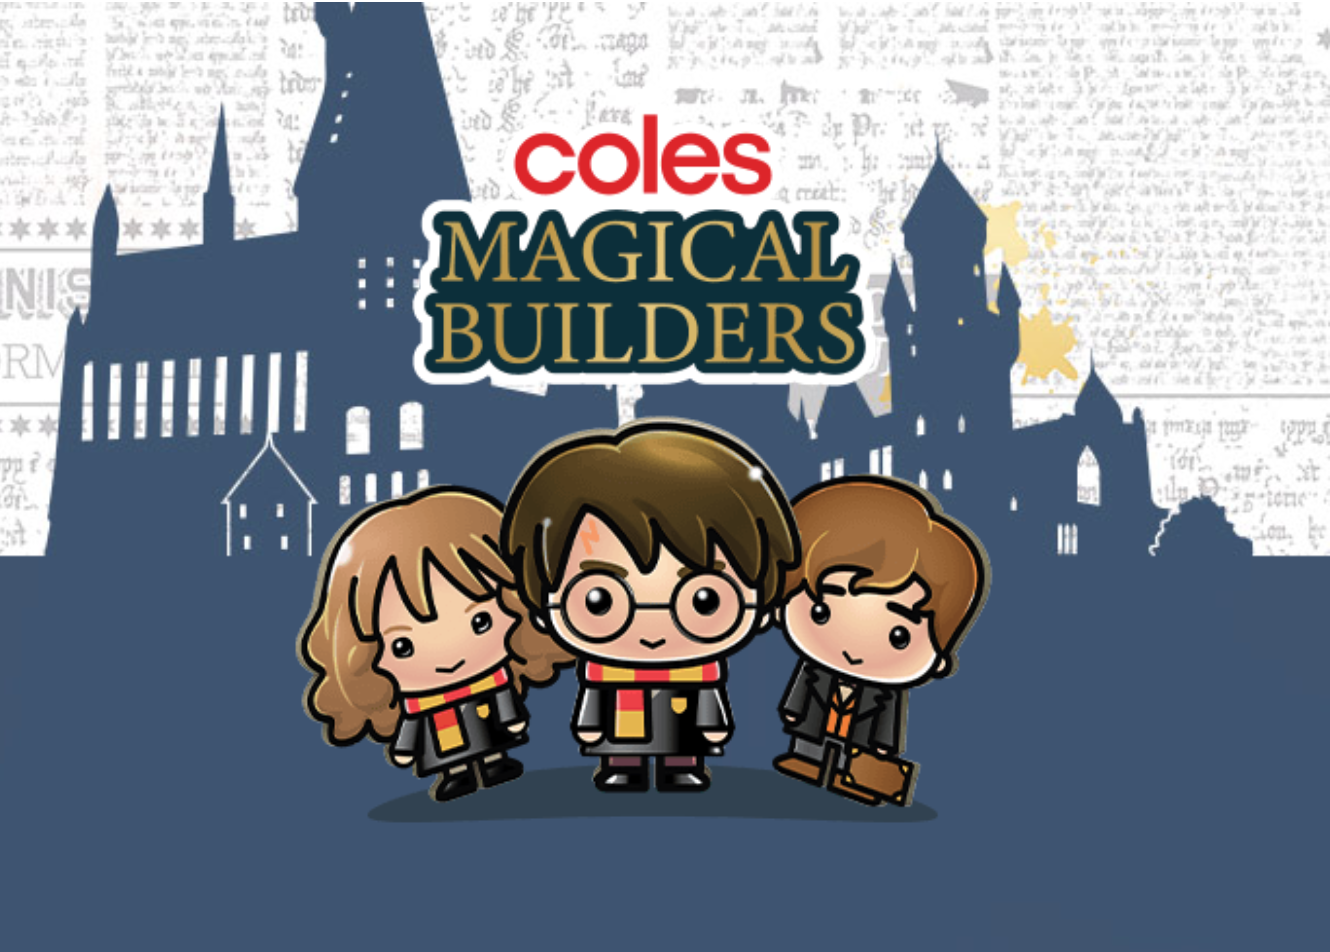 Coles-Magical-Builders-collectibles-merch